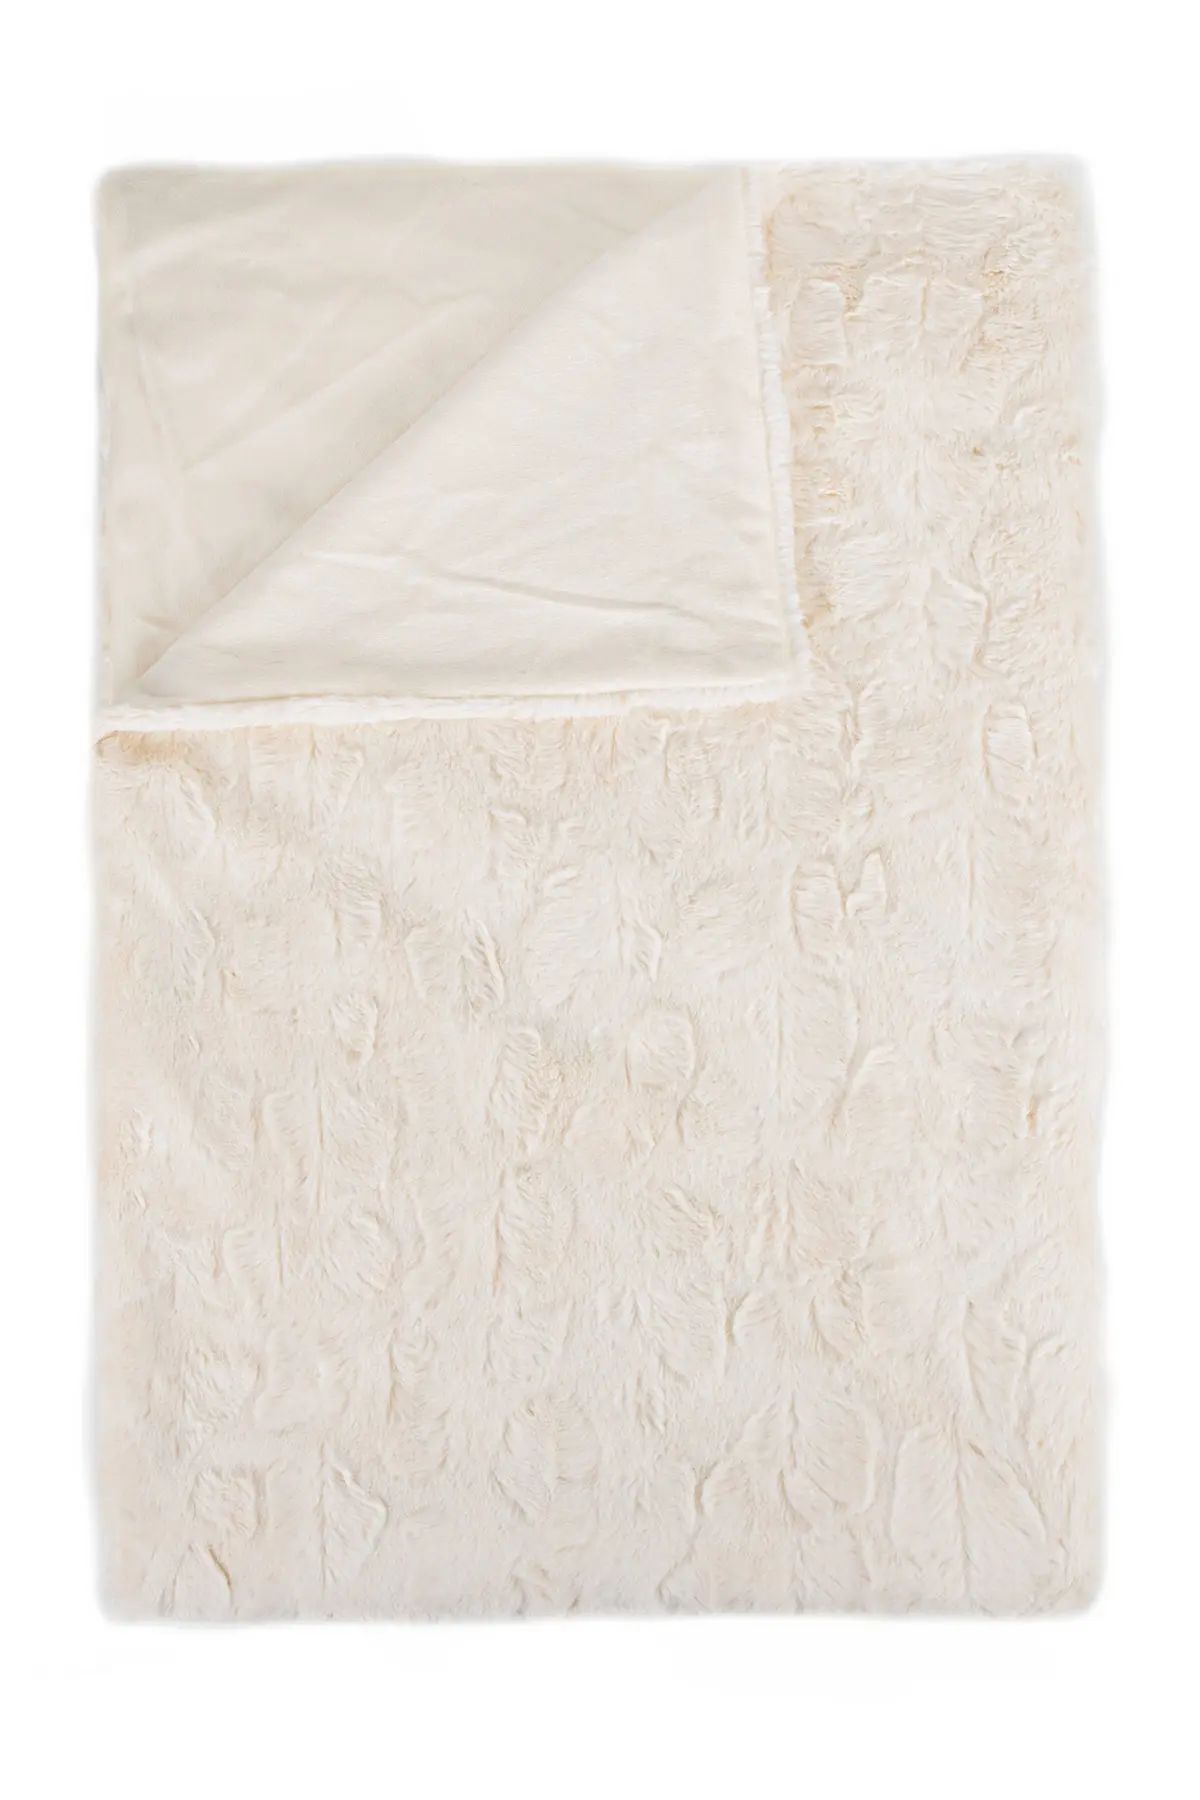 LUXE Reno Off-White Faux Fur Throw- 50" x 60" at Nordstrom Rack | Nordstrom Rack